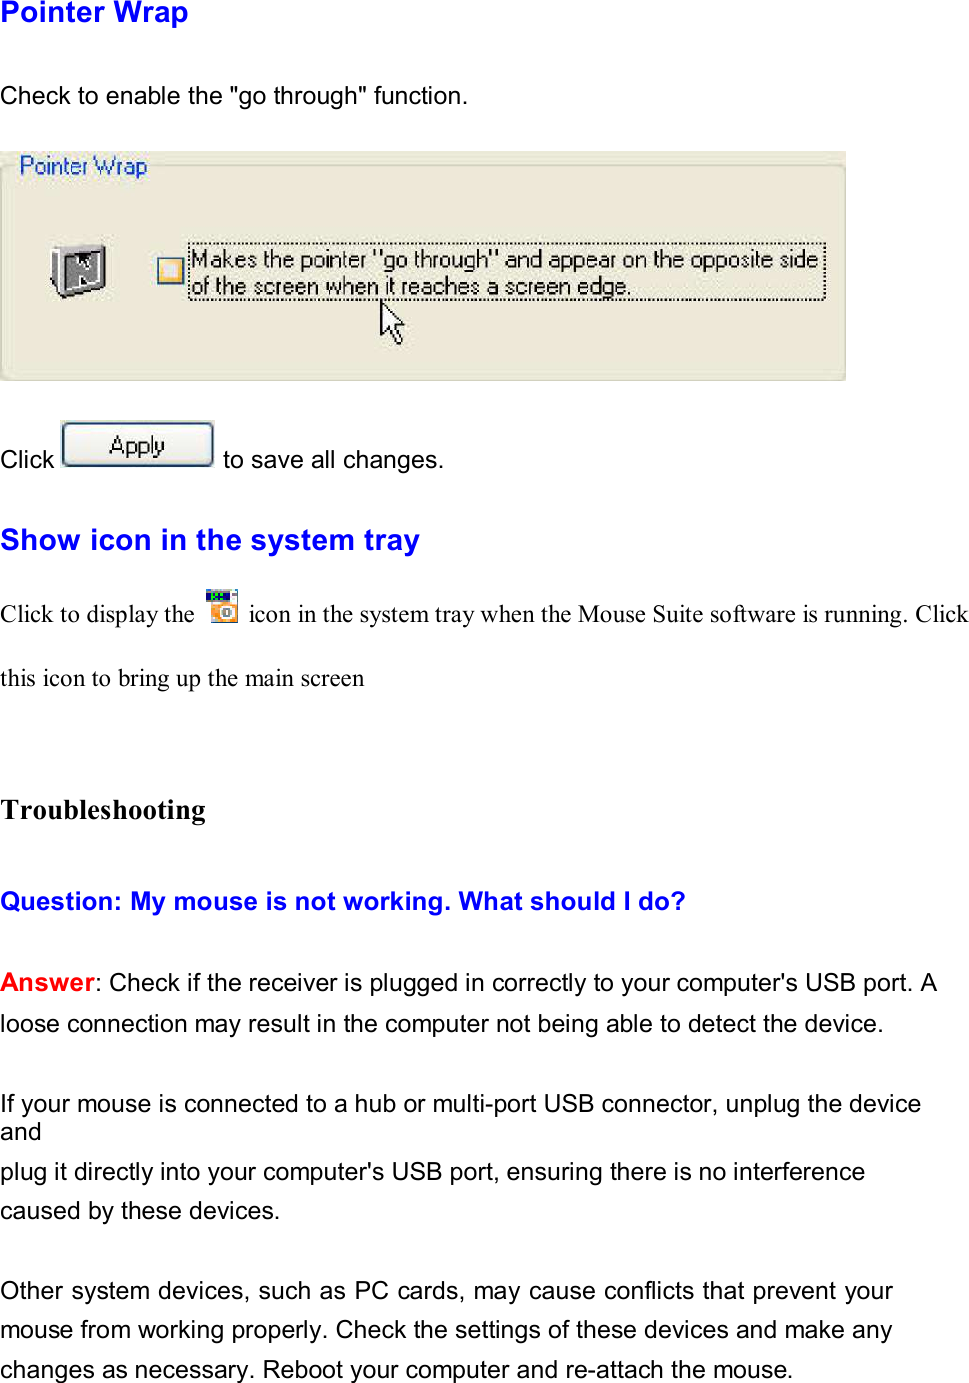 hp wireless comfort mouse manual